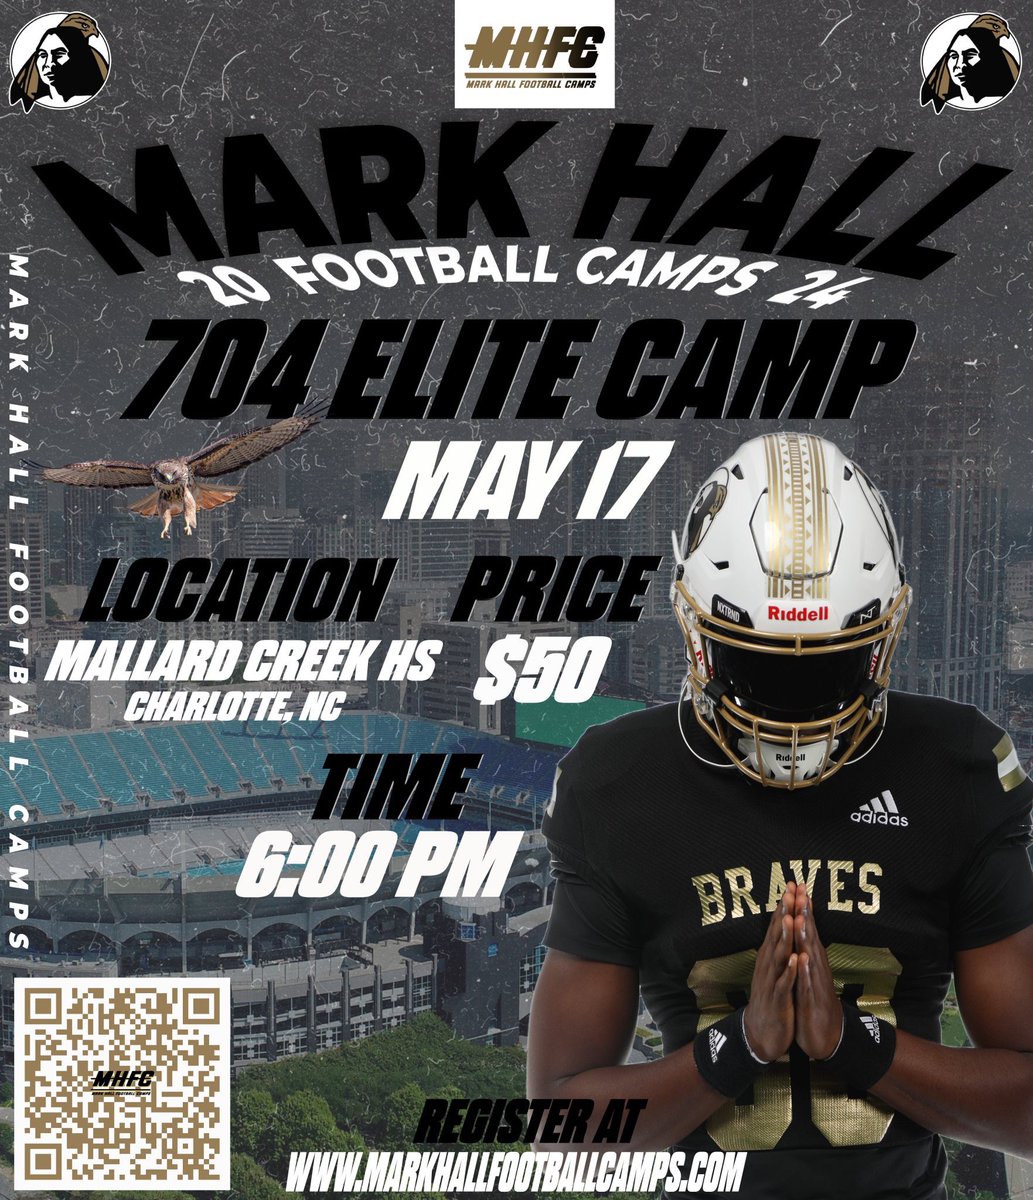 🚨CHARLOTTE 🚨 If you think you has what it takes to play at the next level…we want to see you‼️ Sign up today: markhallfootballcamps.com